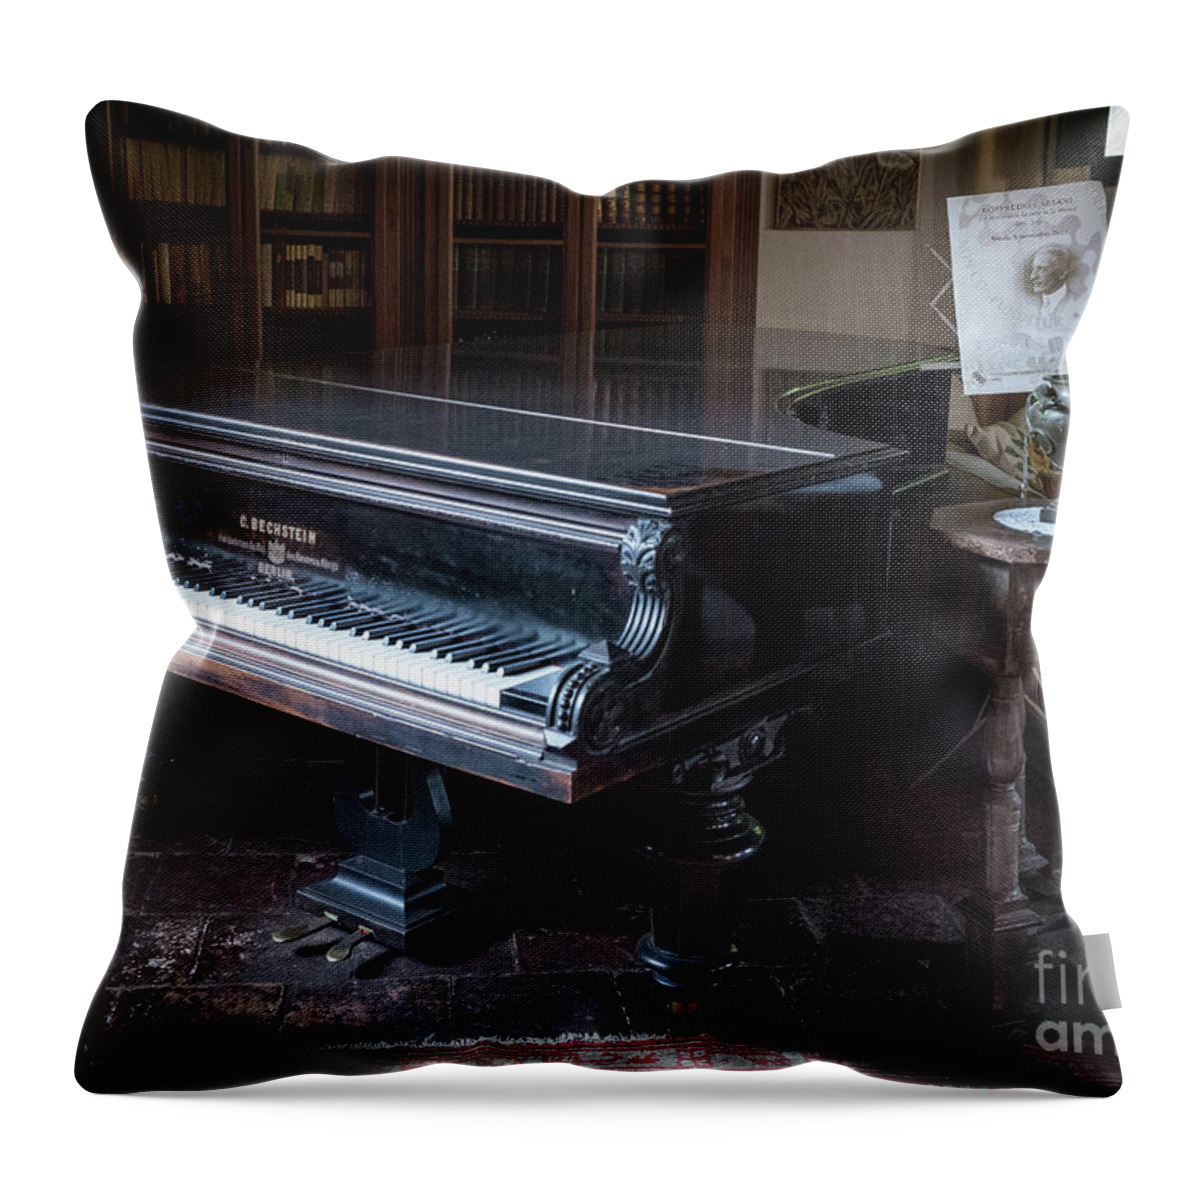 Grand Throw Pillow featuring the photograph Grand Piano, Ninfa, Rome Italy by Perry Rodriguez